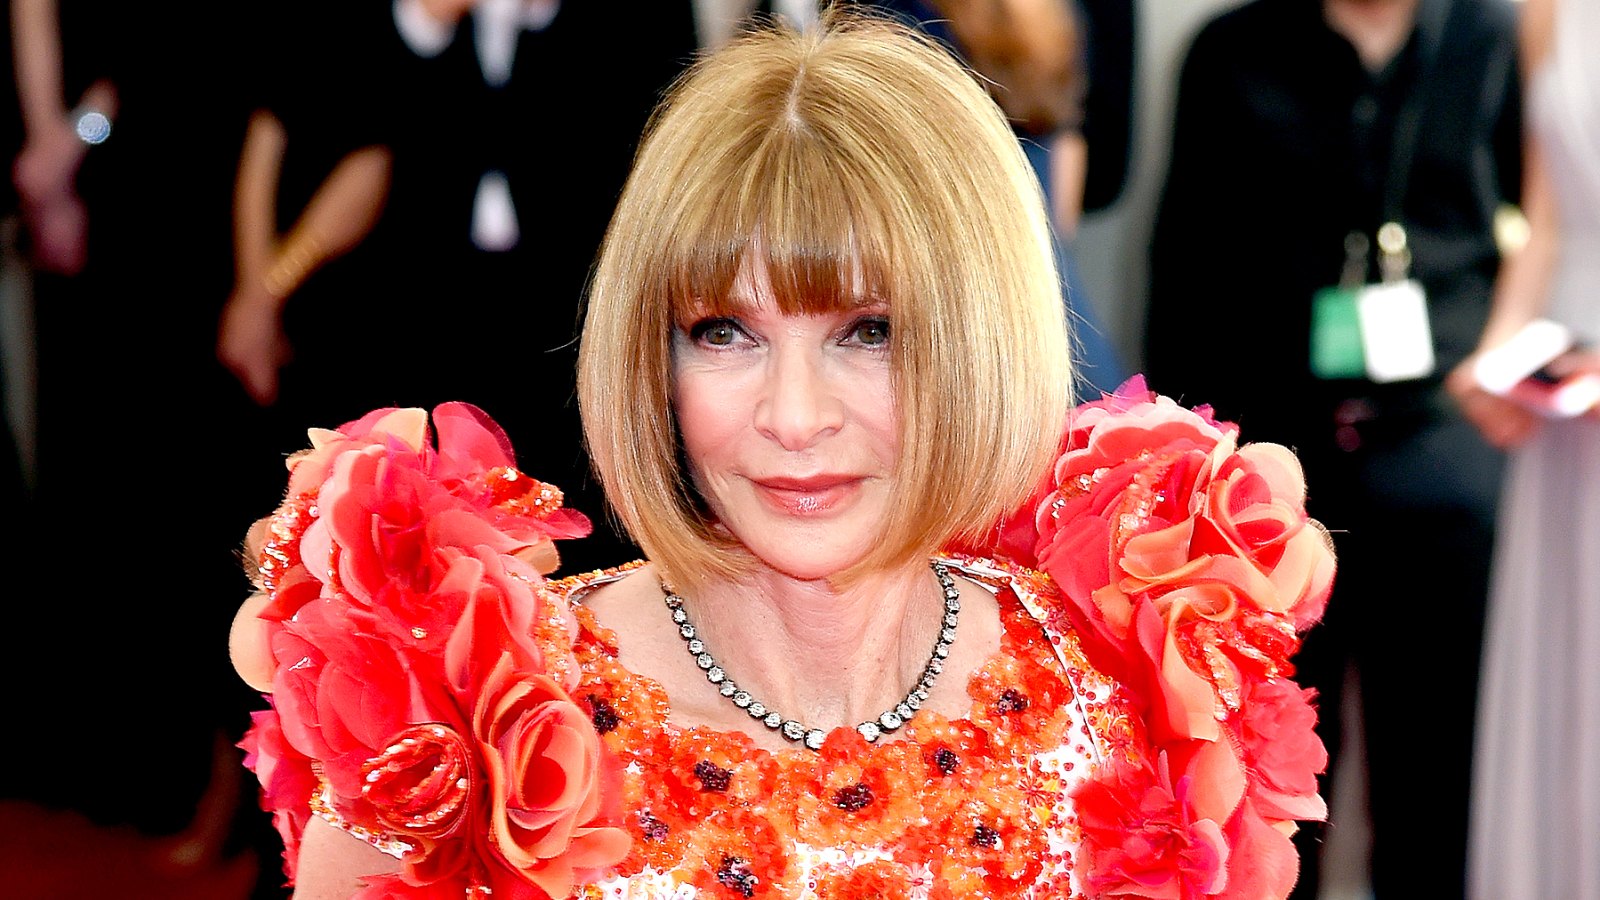 Anna Wintour attends the "China: Through The Looking Glass" Costume Institute Benefit Gala at the Metropolitan Museum of Art on May 4, 2015.